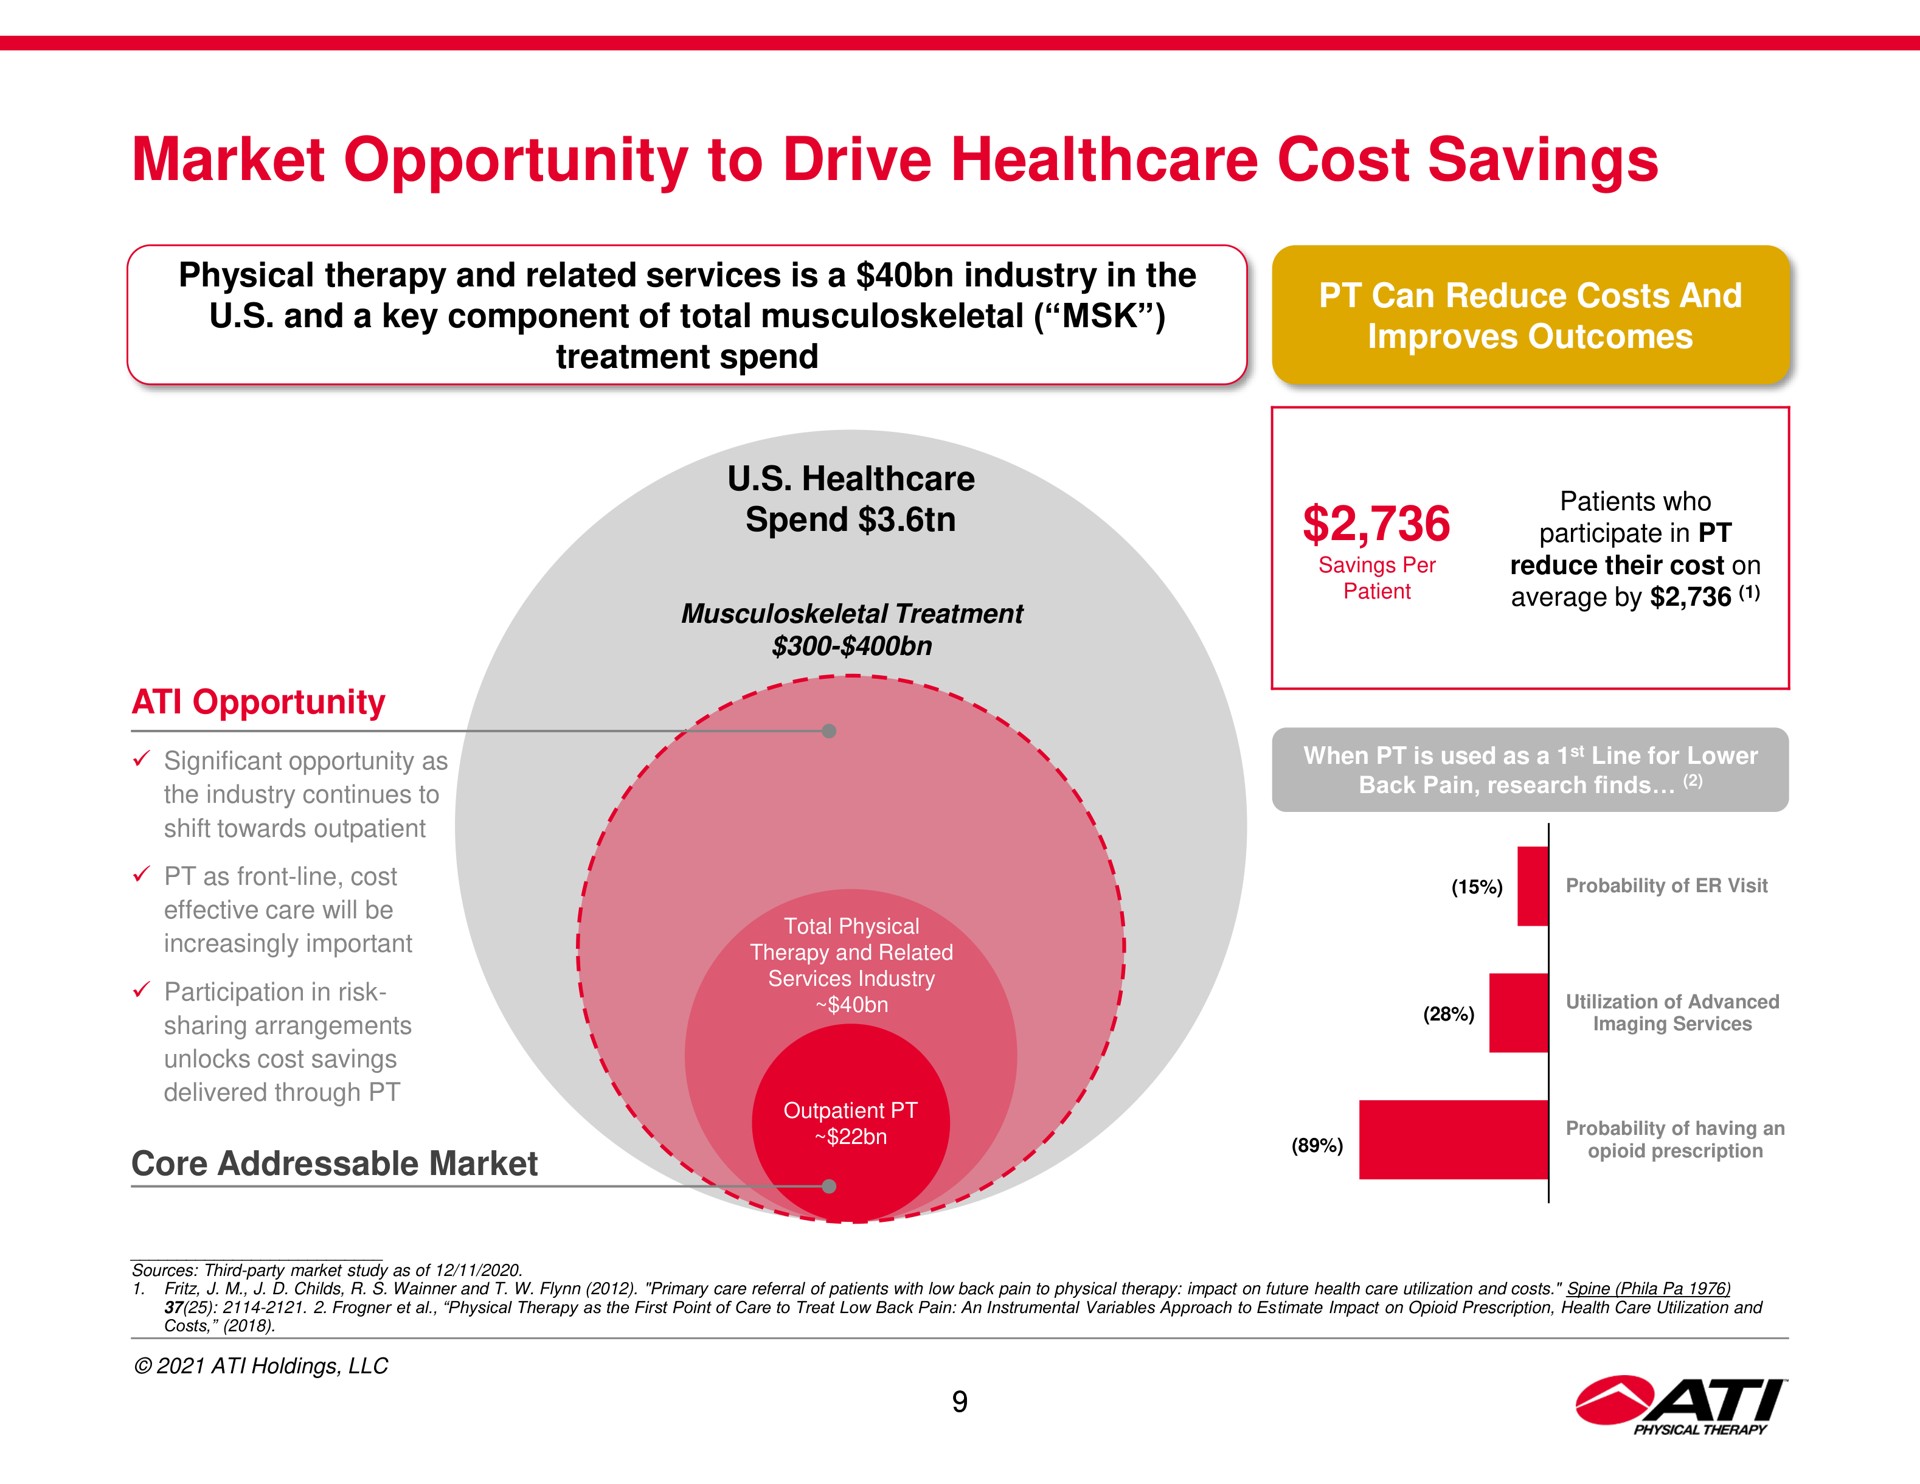 market opportunity to drive cost savings | ATI Physical Therapy